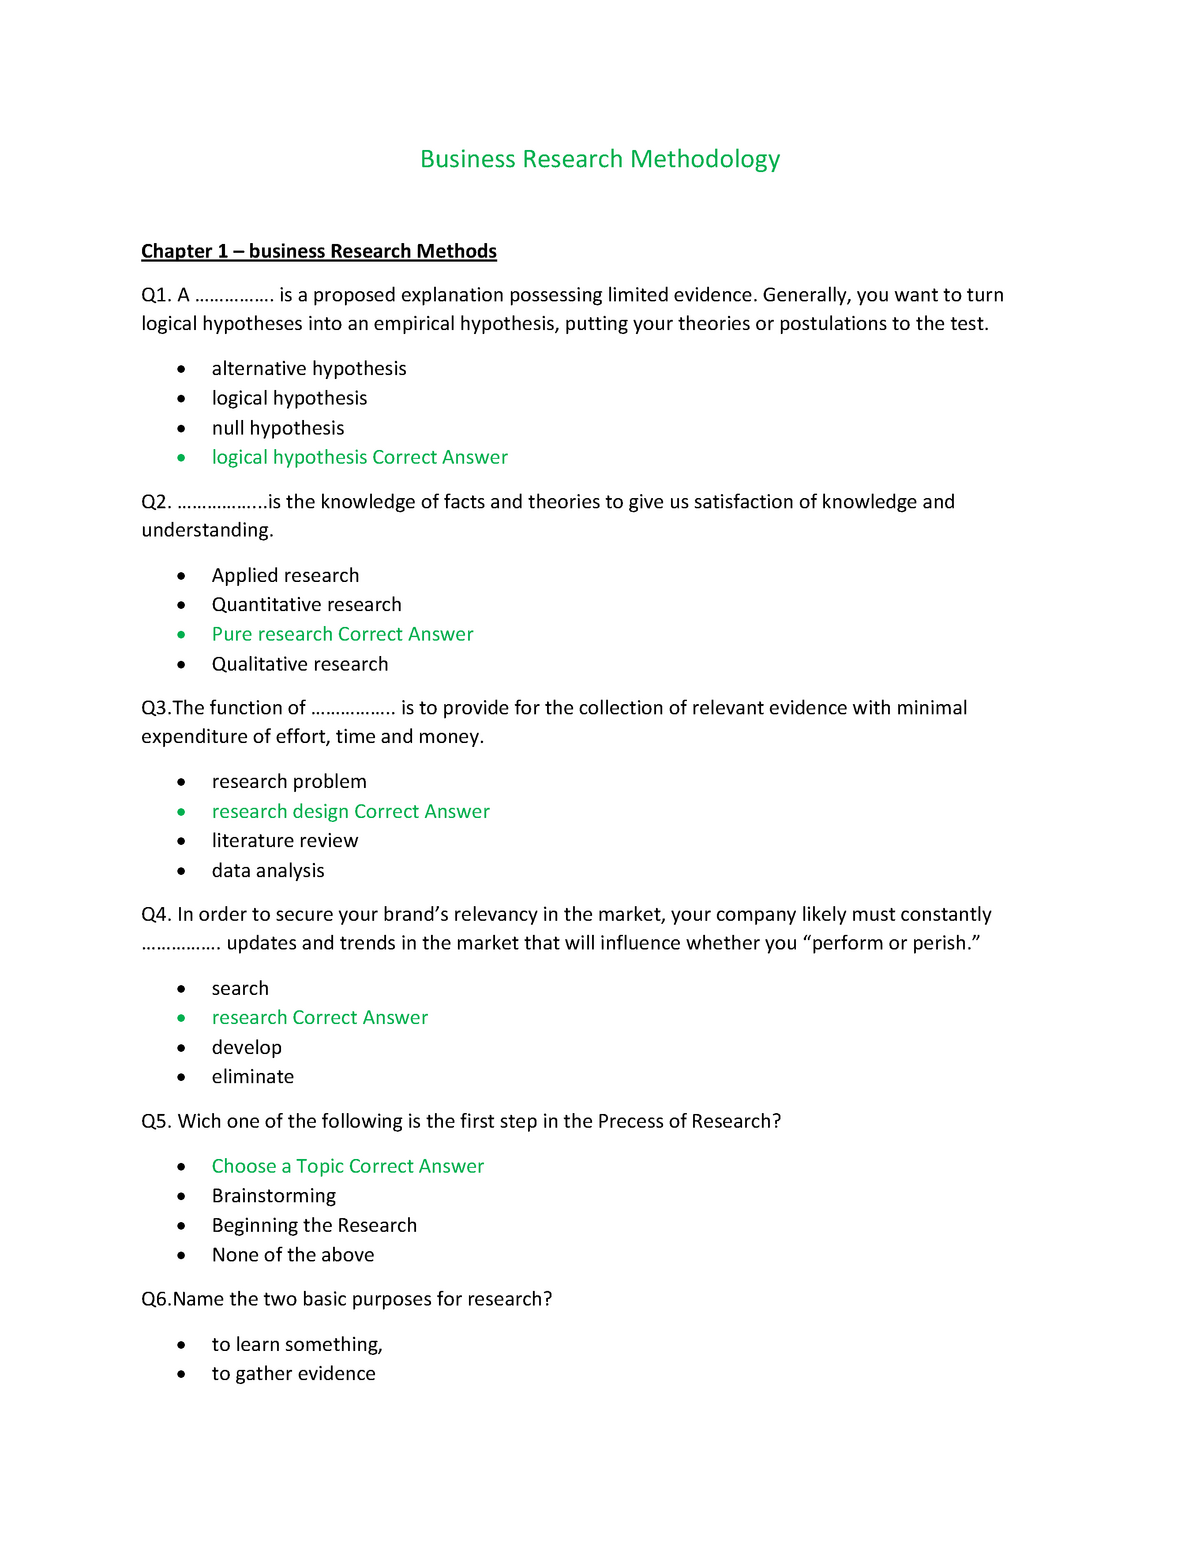 business research methods exam questions and answers pdf